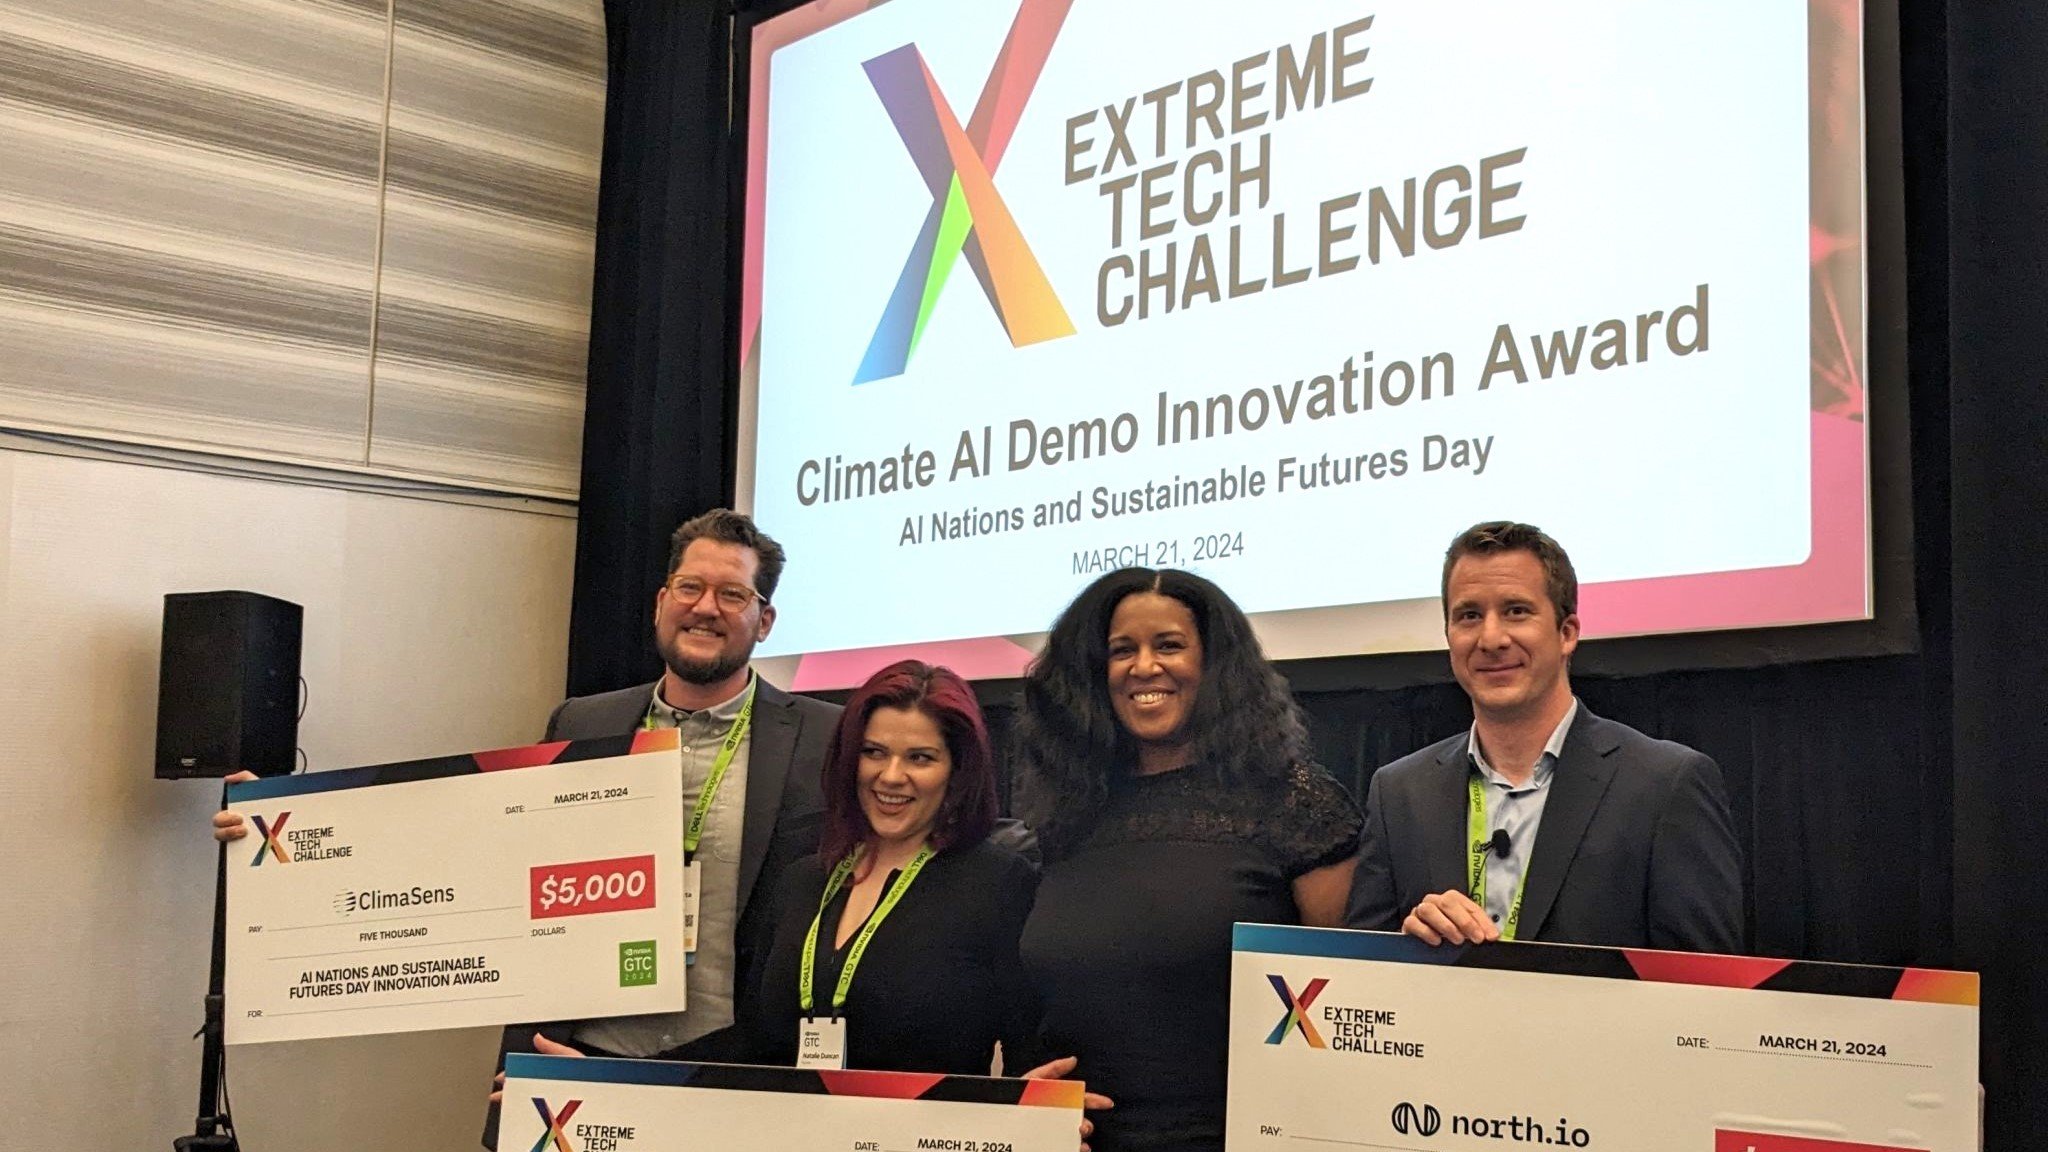 north.io Wins Extreme Tech Challenge Award at NVIDIA GTC AI conference 2024. Jann Wendt accepts the award.